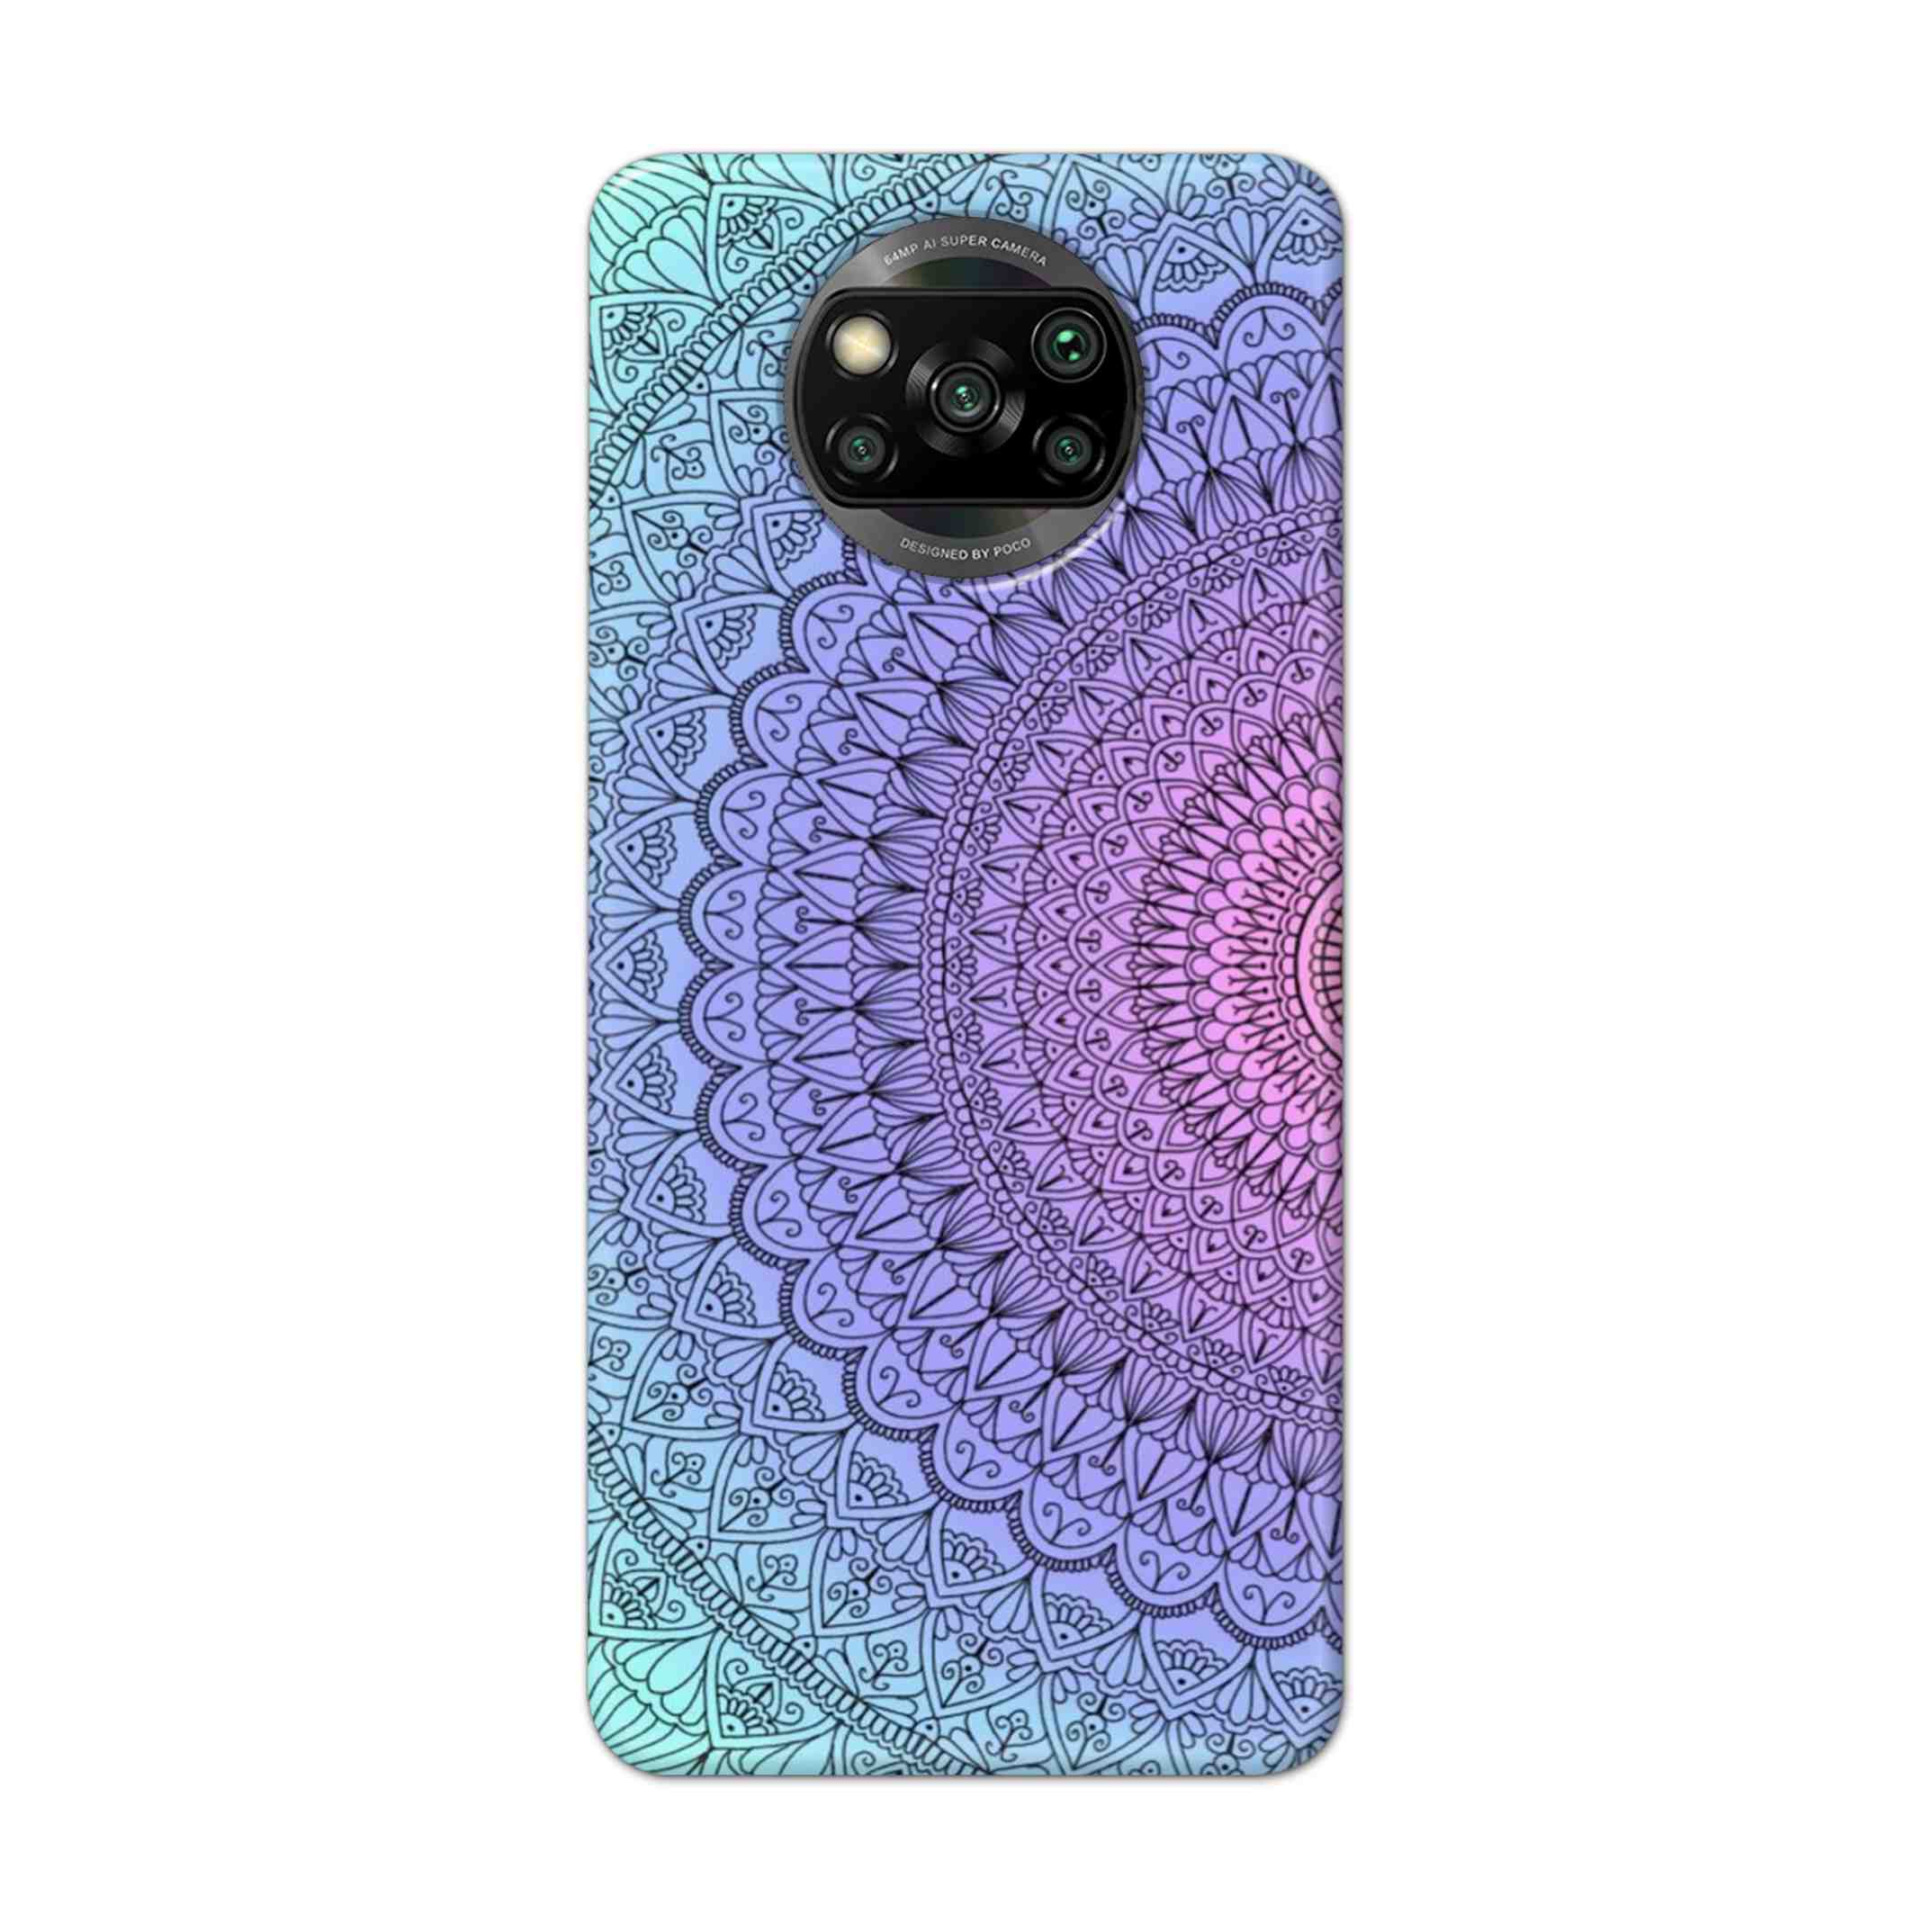 Buy Colourful Mandala Hard Back Mobile Phone Case Cover For Pcoc X3 NFC Online